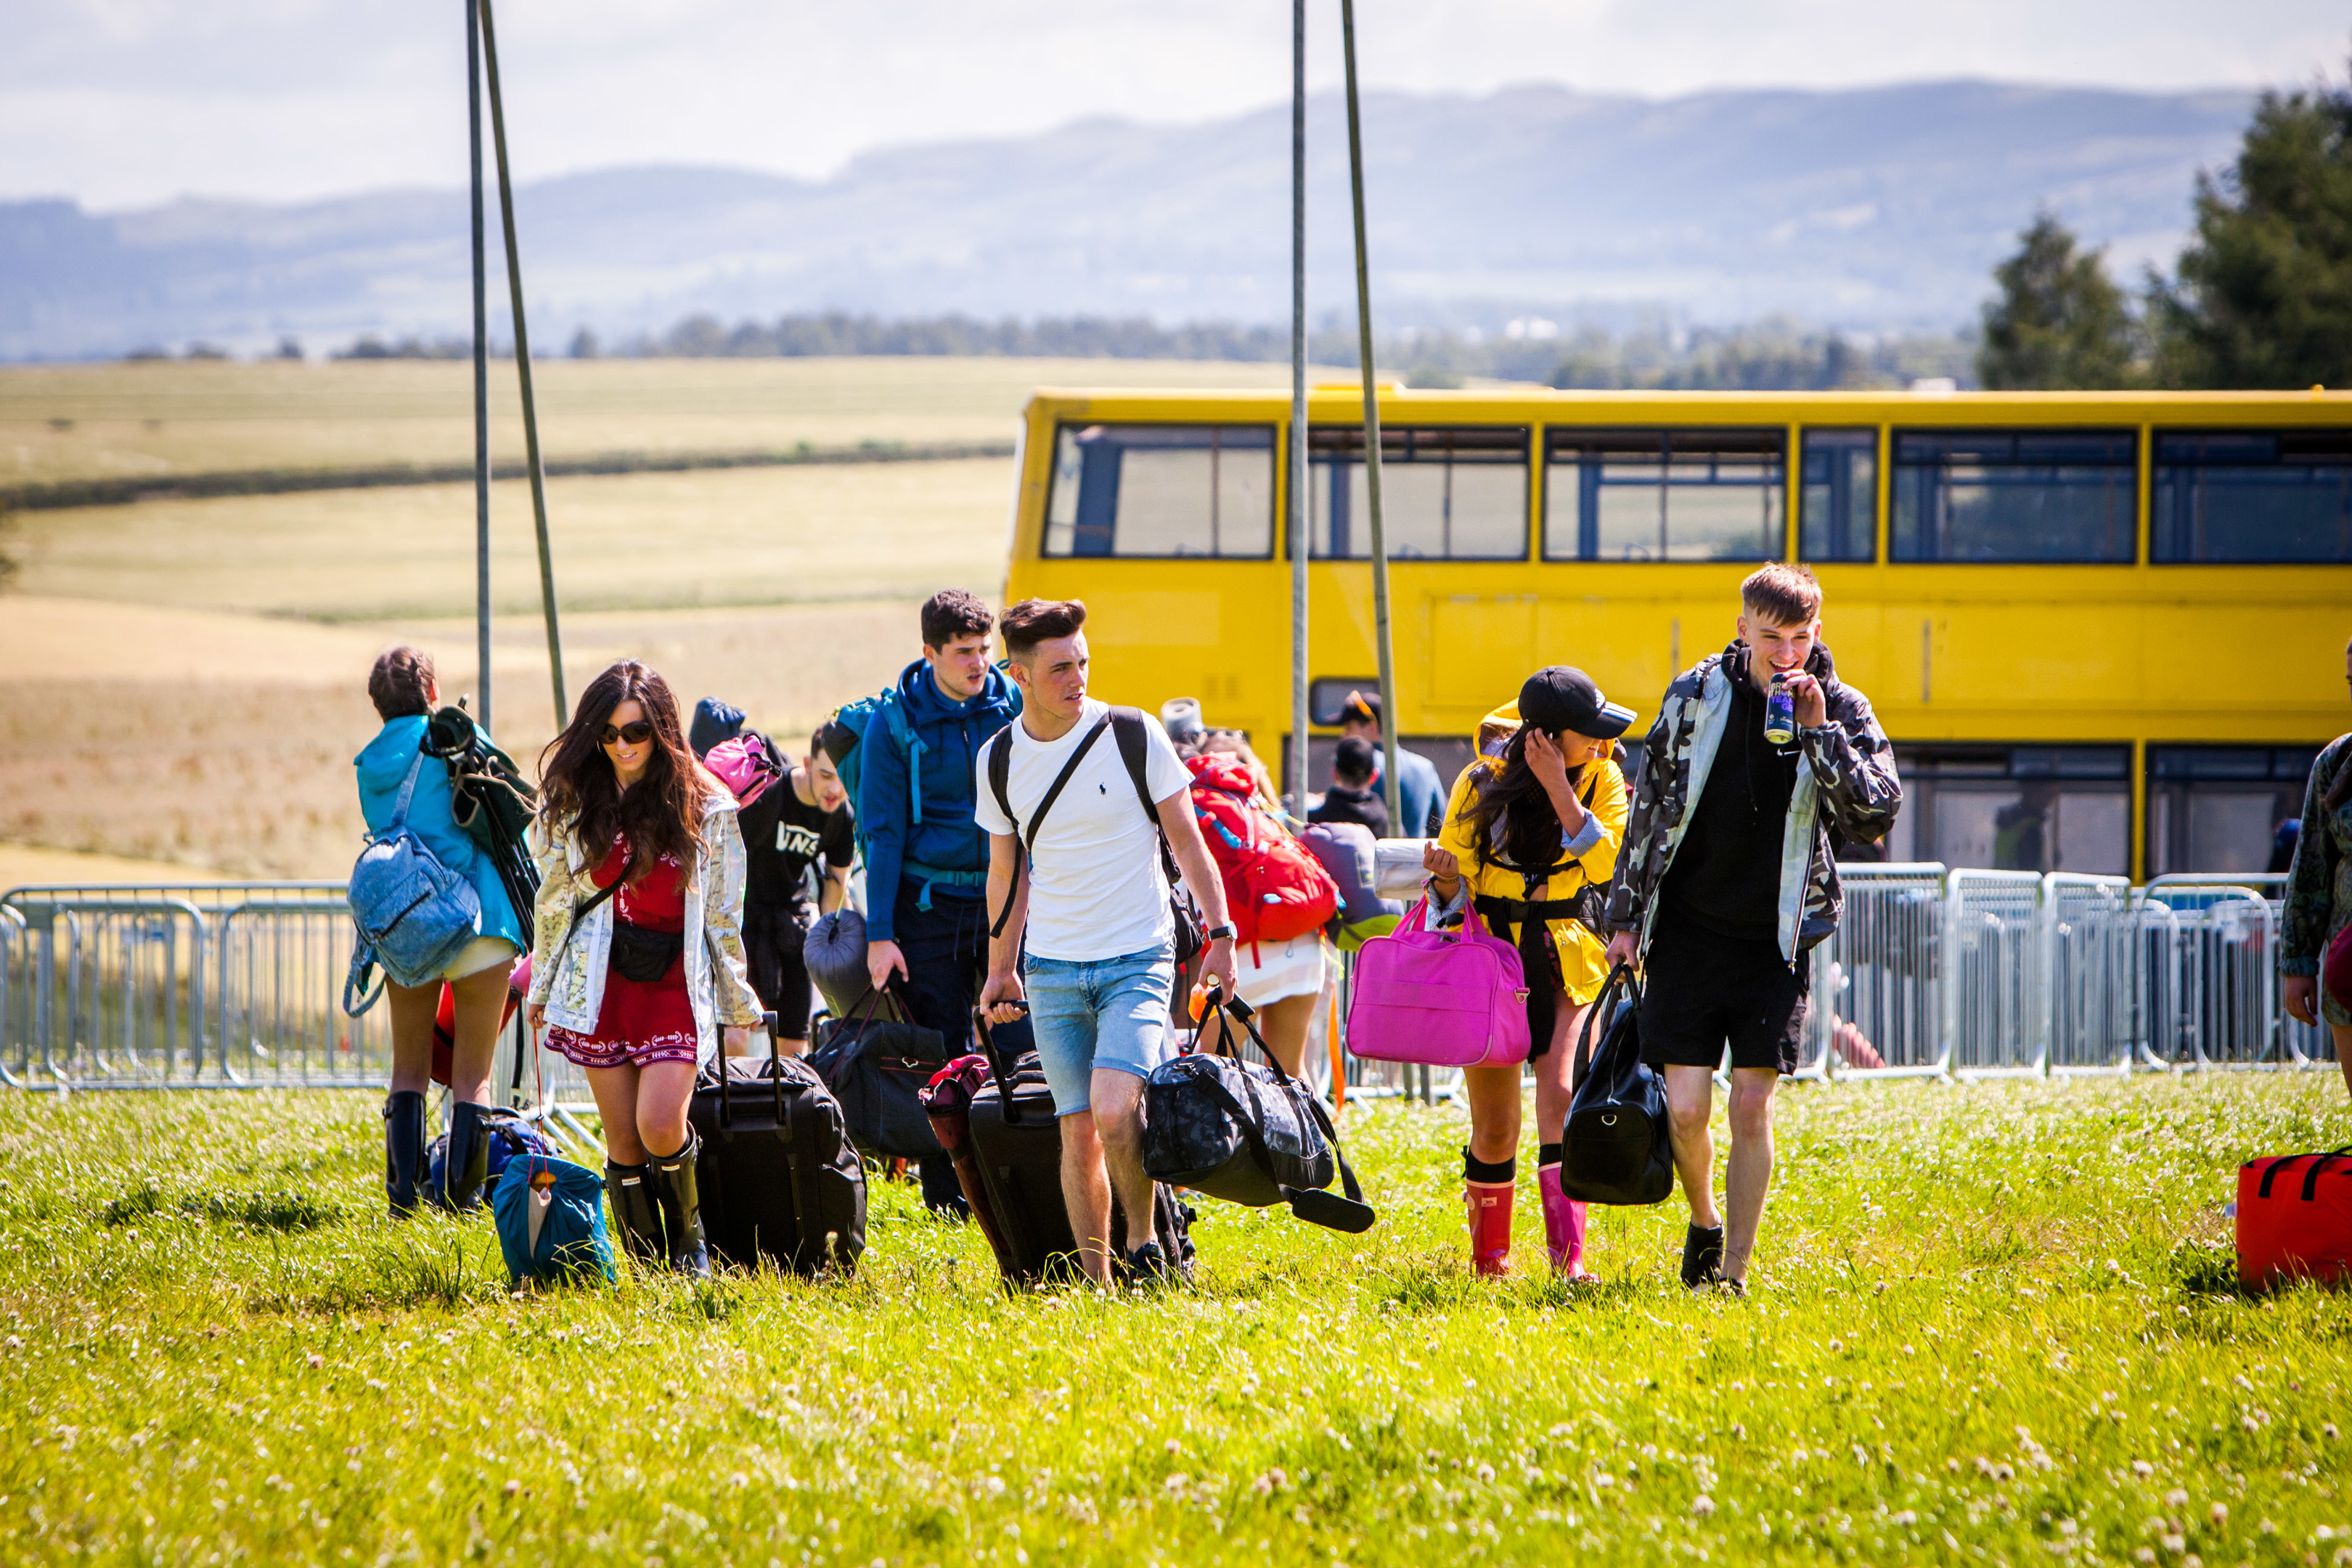 Revellers arriving at T in the Park.